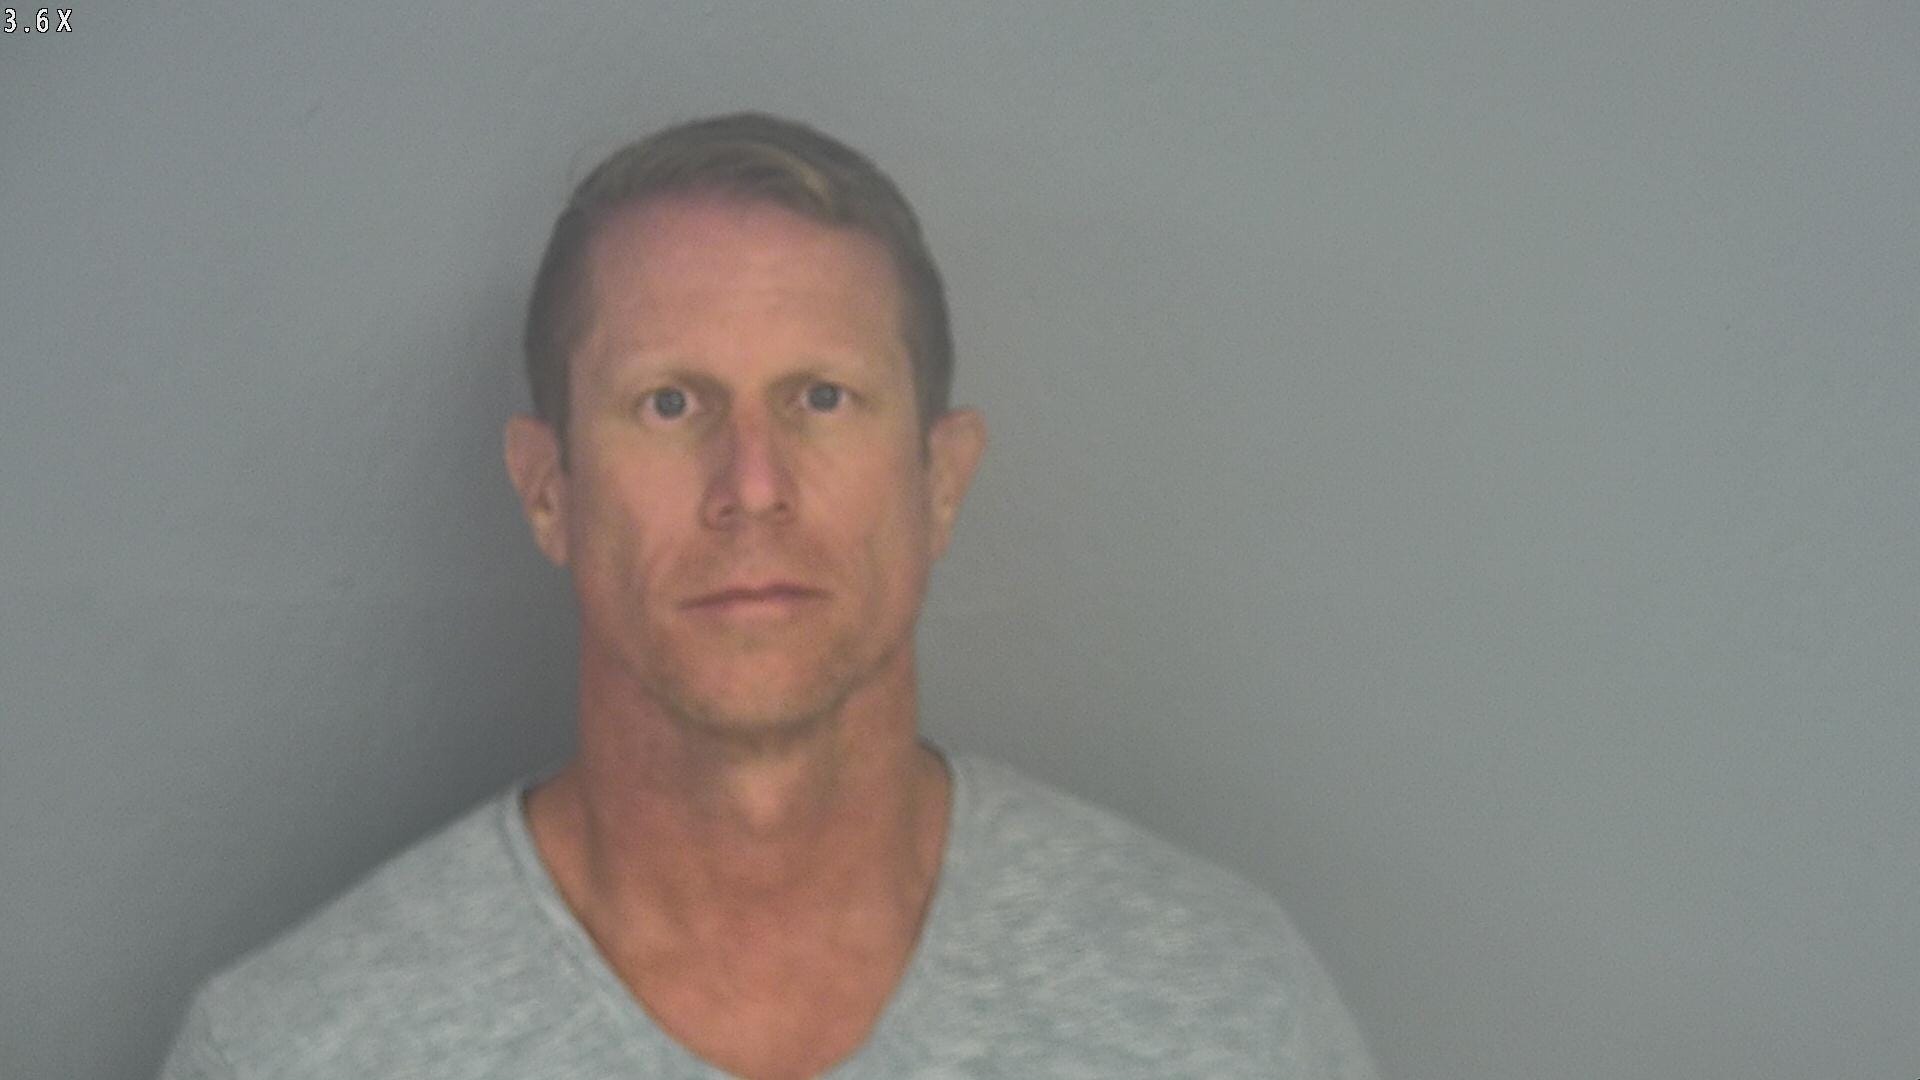 Willard High soccer coach arrested after sexual misconduct allegations